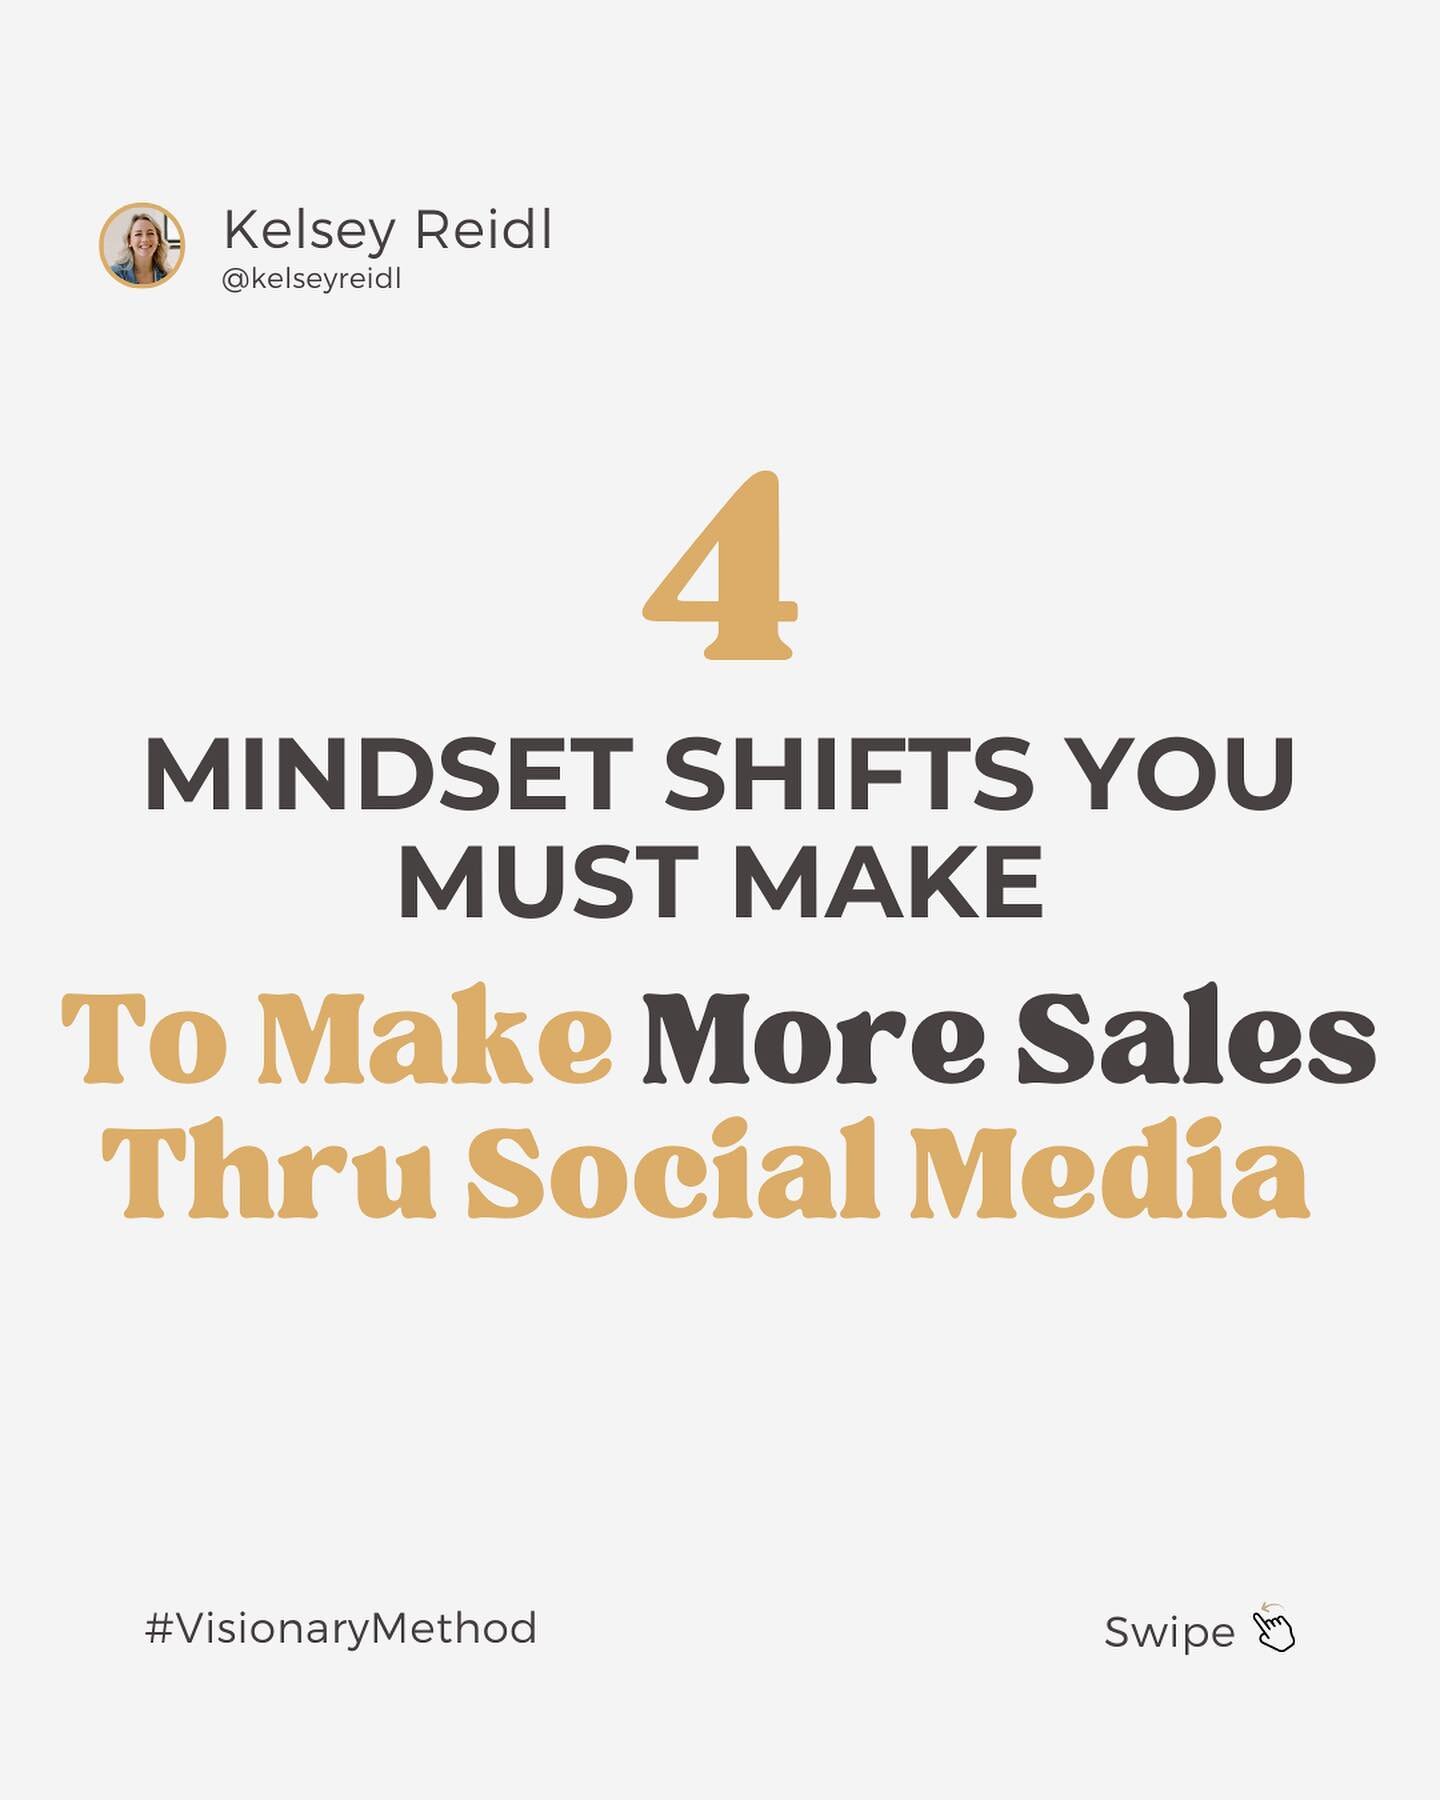 4 Mindset Shifts Required to Make More Sales 💰 through Social Media 📱

(Swipe to see what they are 👉) 

#visionarymethod #visionarysocialmedia #socialmediasales #marketingtips